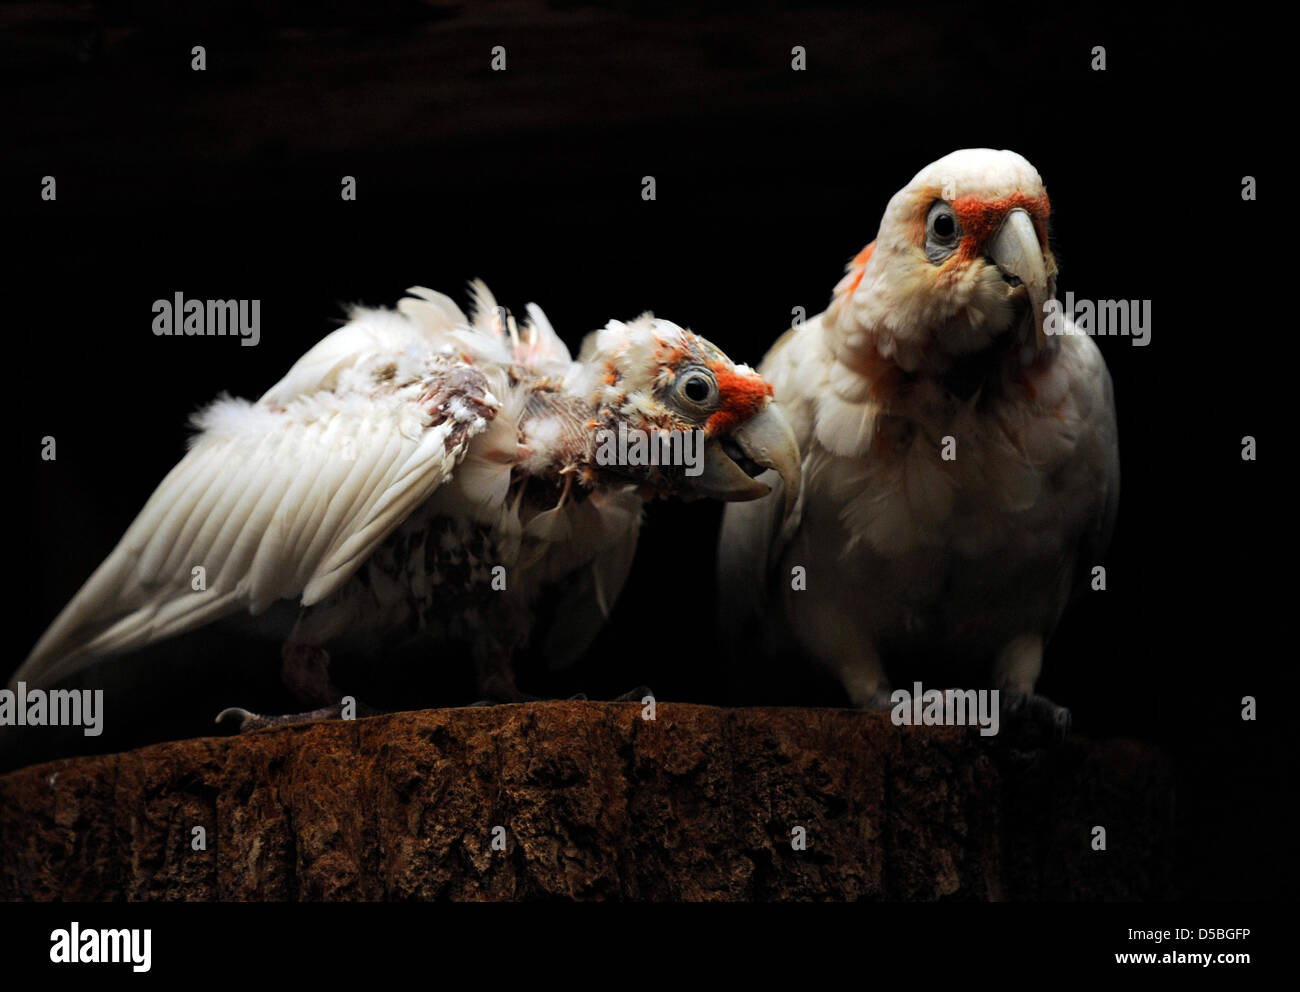 A three-month-old Long-billed Corella fledgling sits in it's enclosure at the Tierpark Hellabrunn in Munich, Germany, 03 September 2010. It's feathers have not fully grown yet. The Corellas are Cacadus and live in Australia. Photo: Andreas Gebert Stock Photo